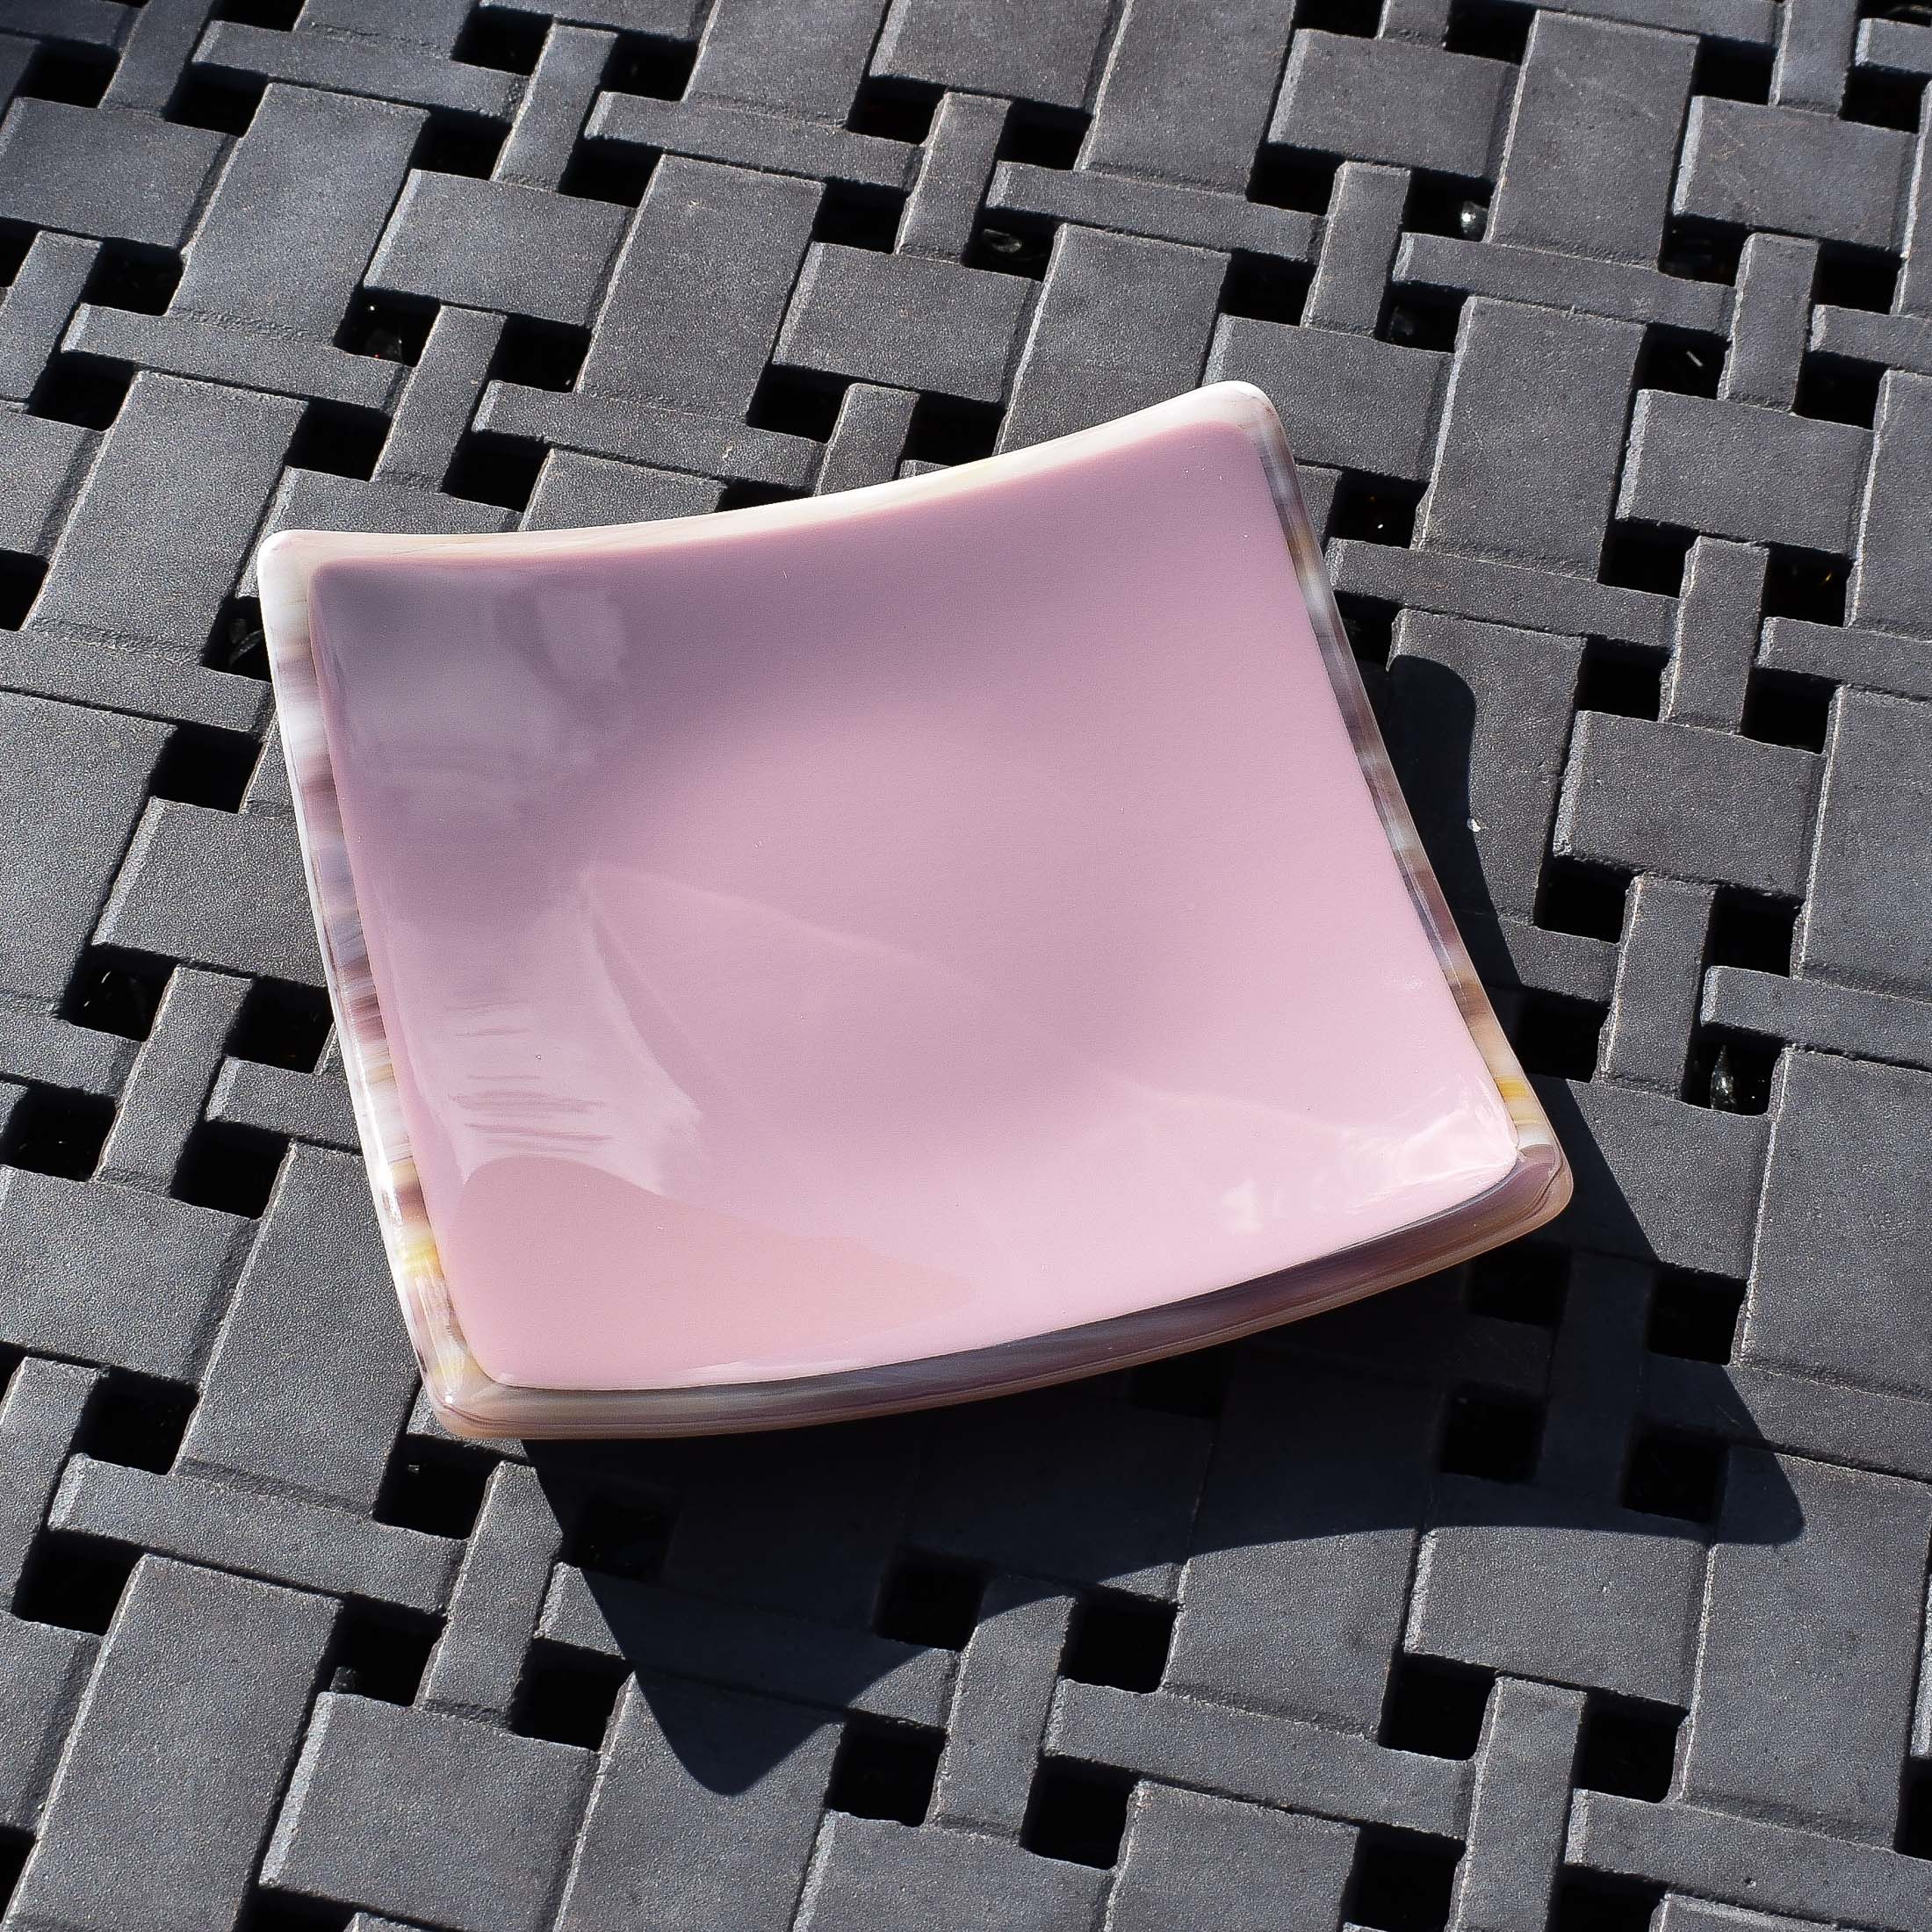 Violet/light purple fused glass dish that is 6" square with multi-color rim and back on a steel grid.